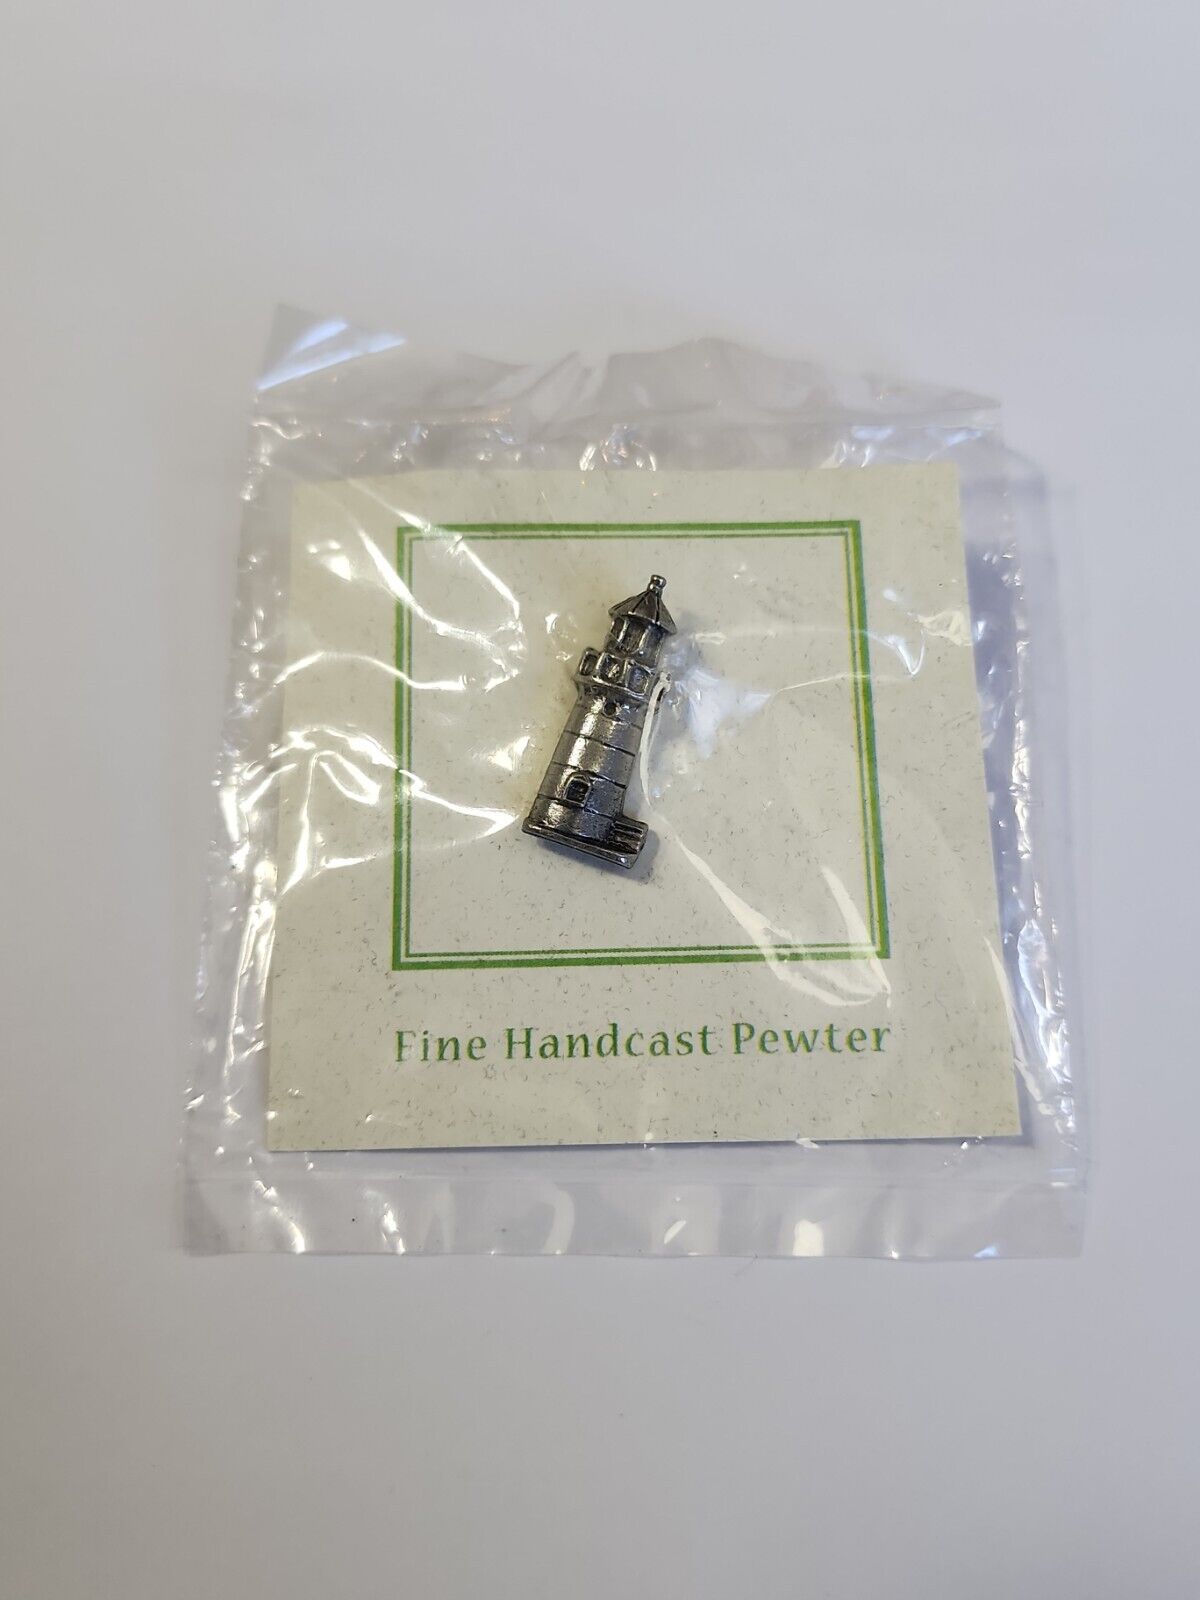 Lighthouse Lapel Pin by Jim Clift Fine Handcast Pewter 2005